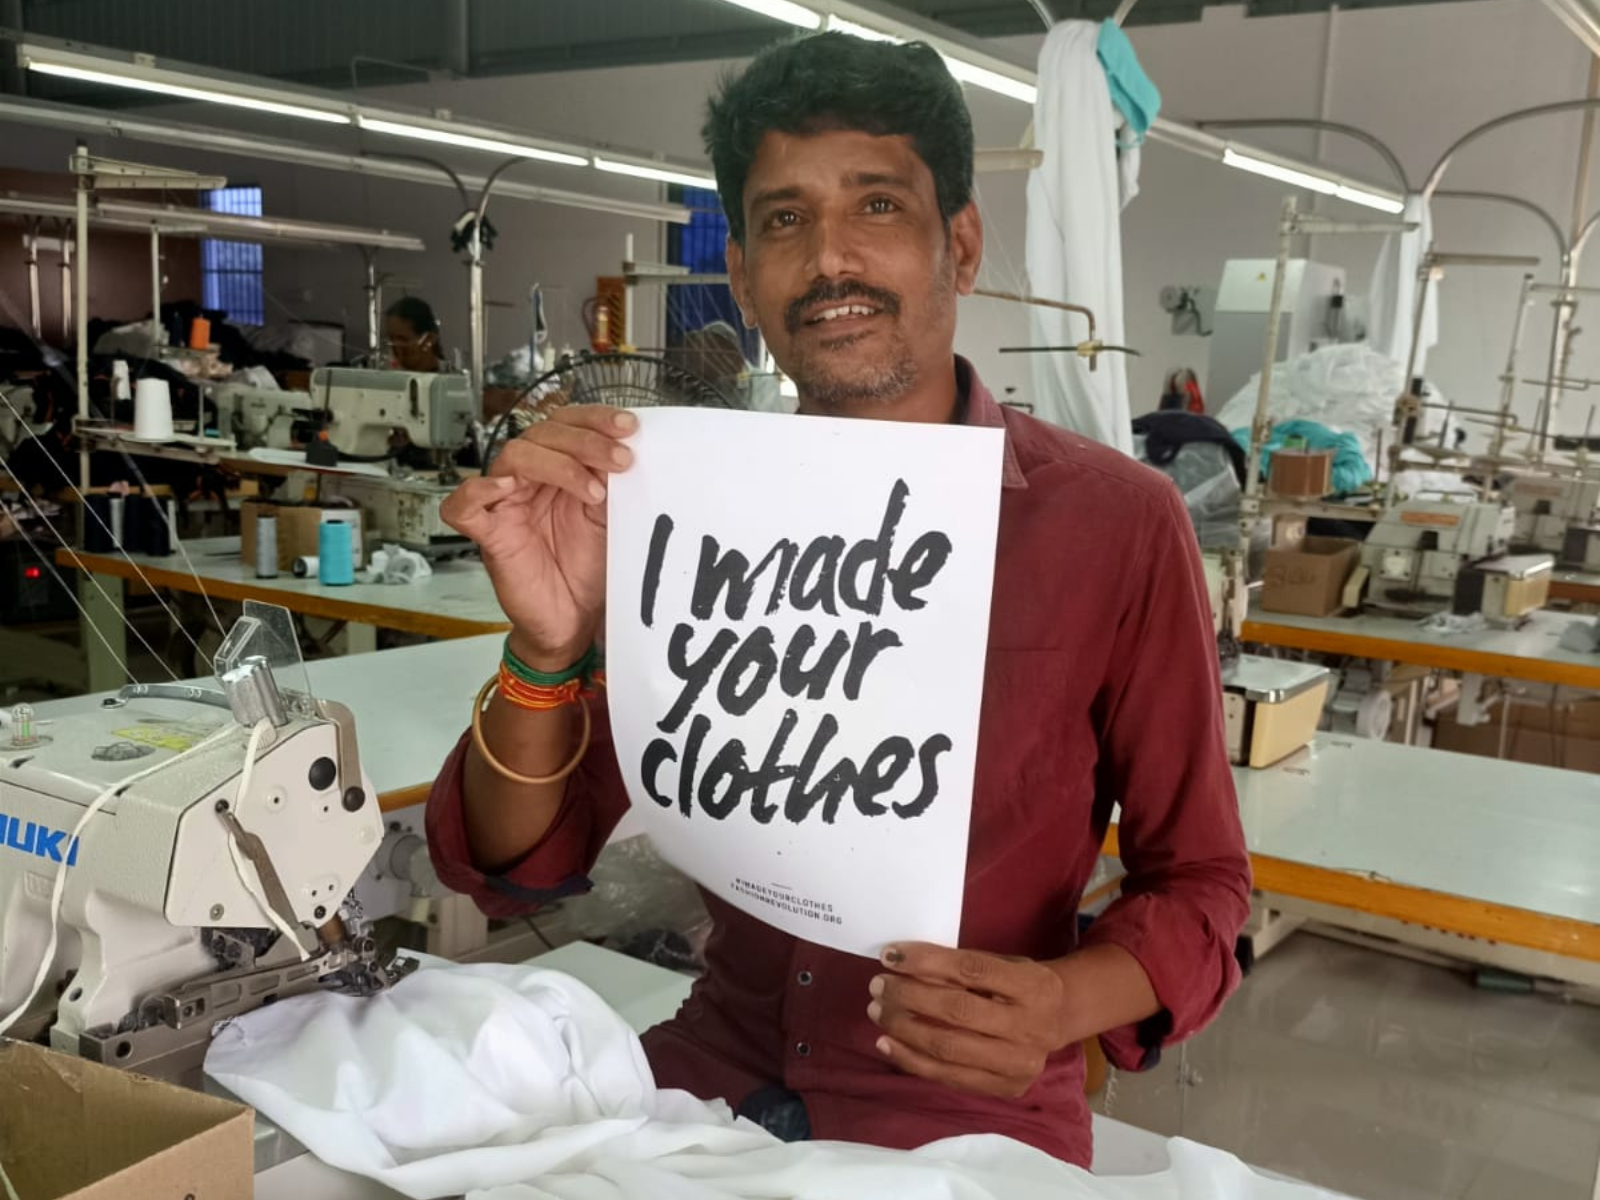 Changing how we talk about the people that make our clothes